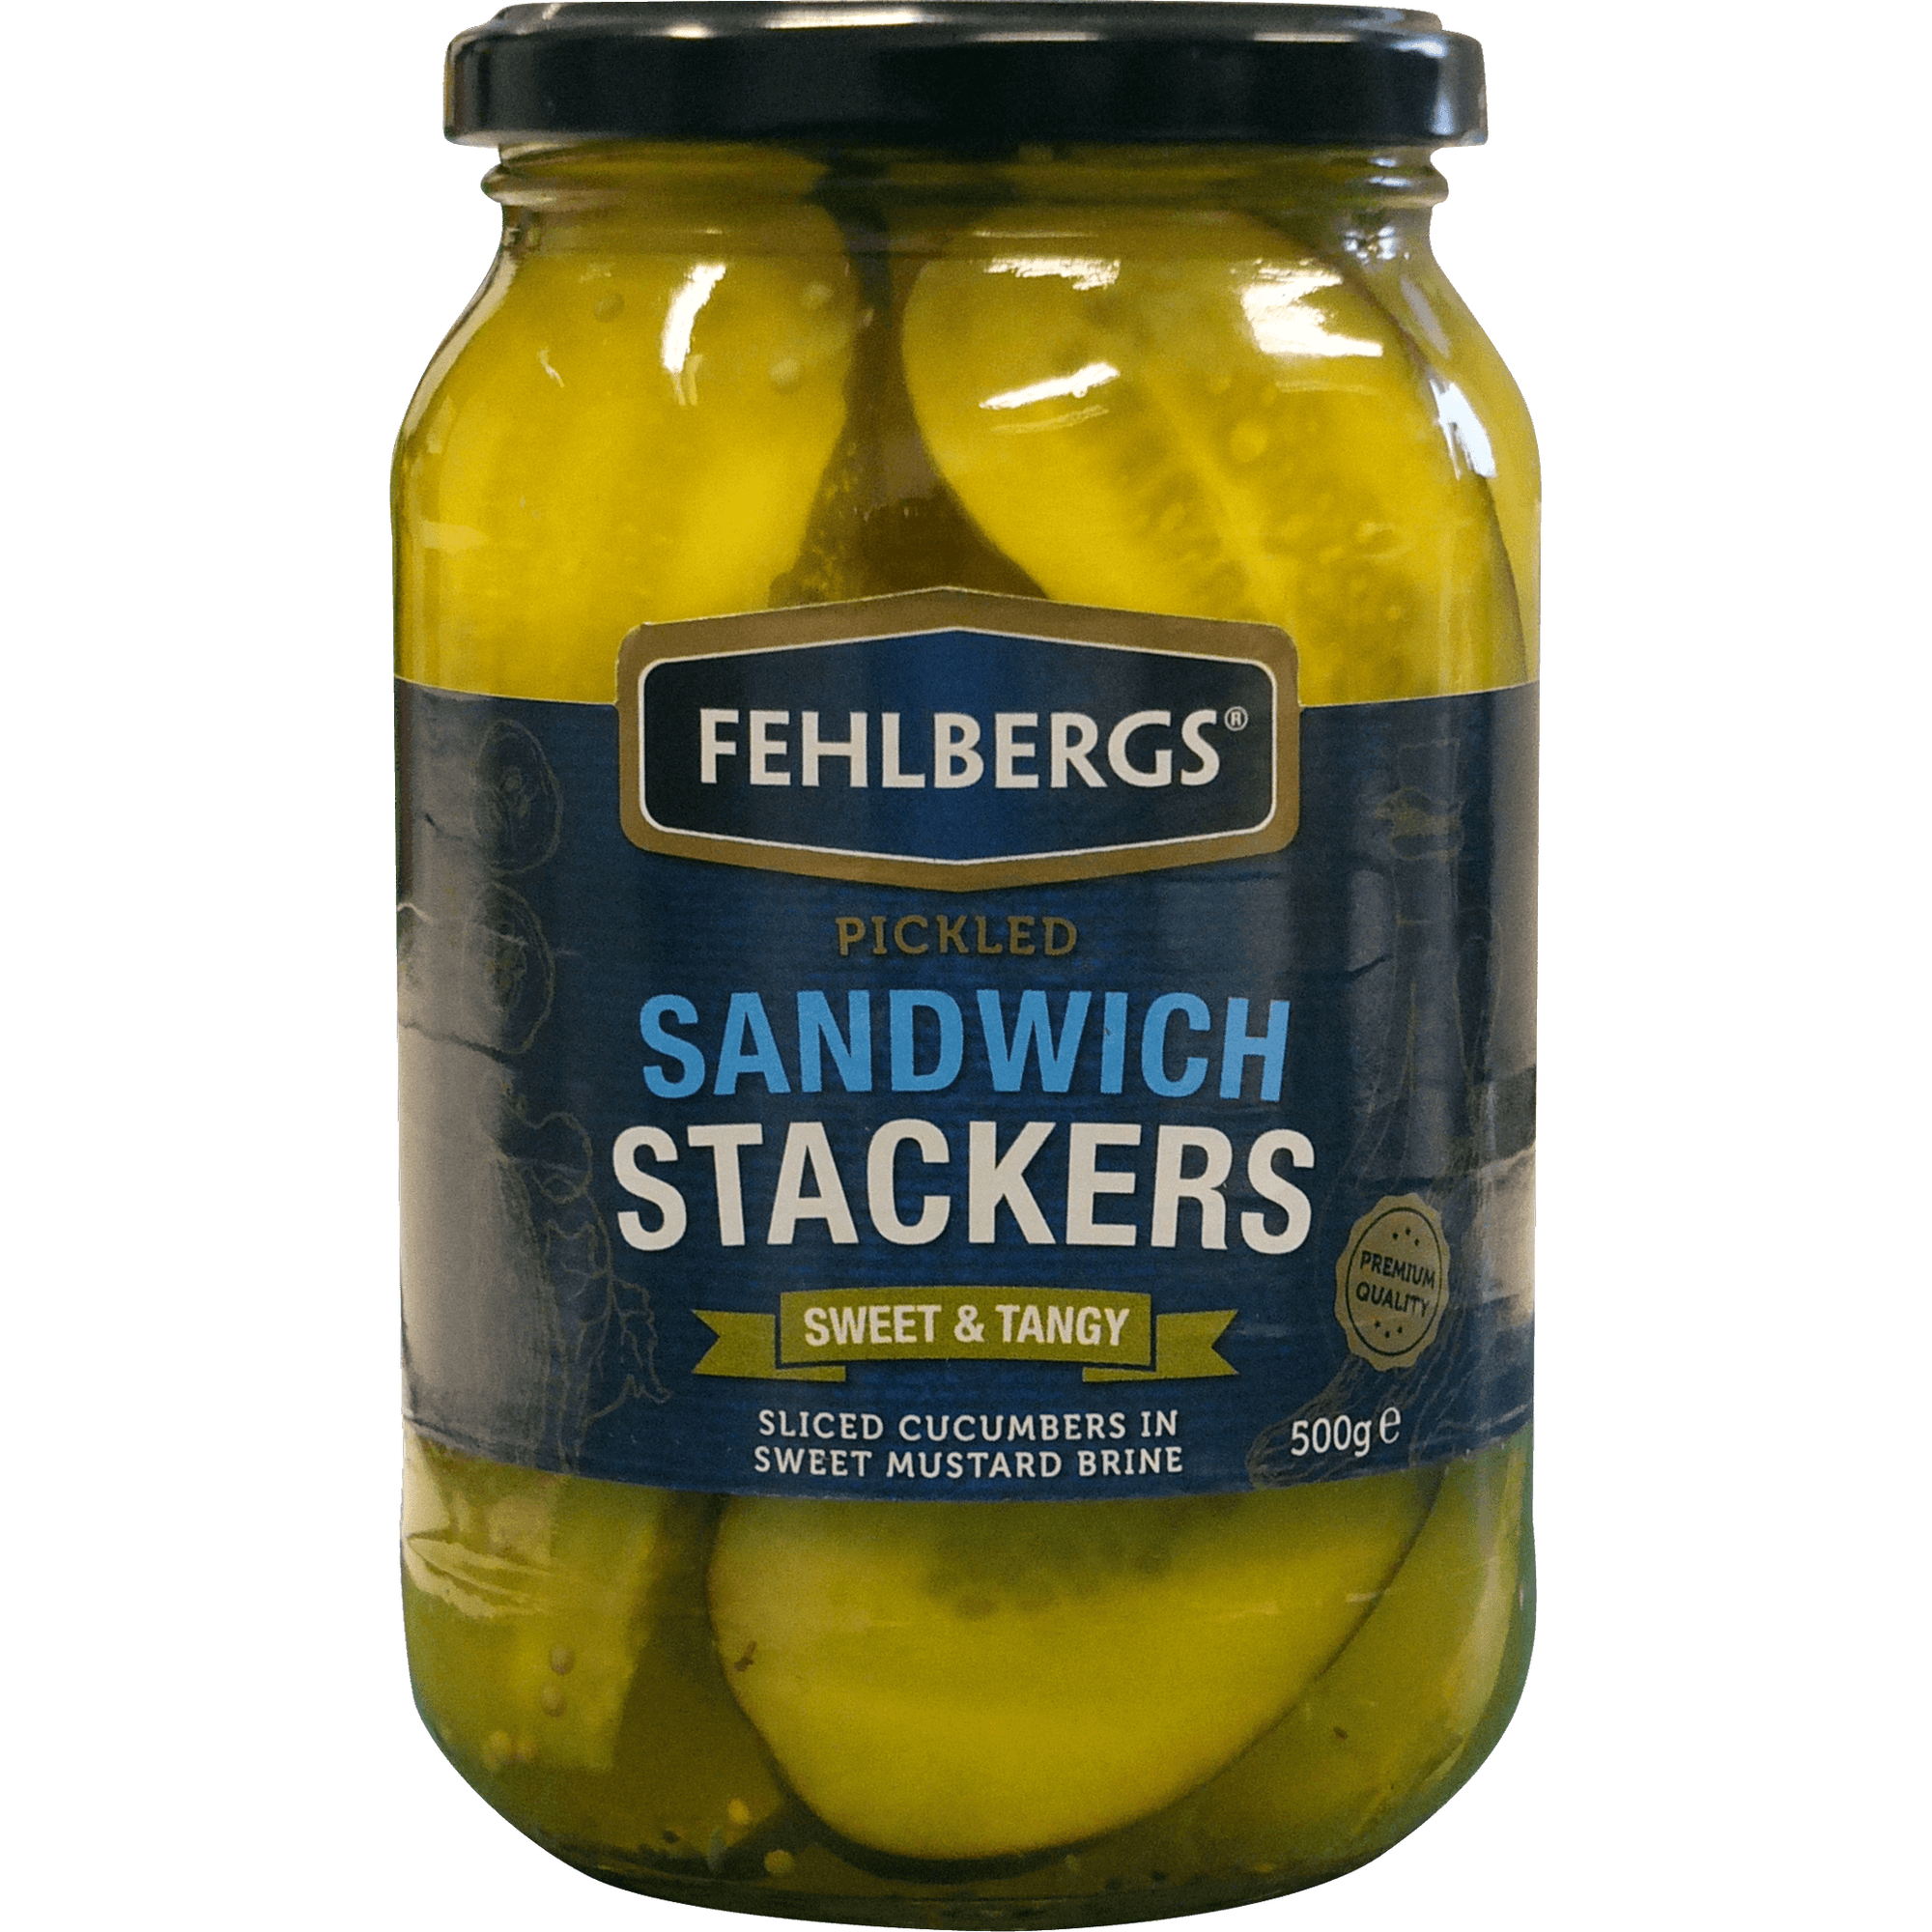 Fehlbergs Pickled Sandwich Stackers Cucumbers 500g